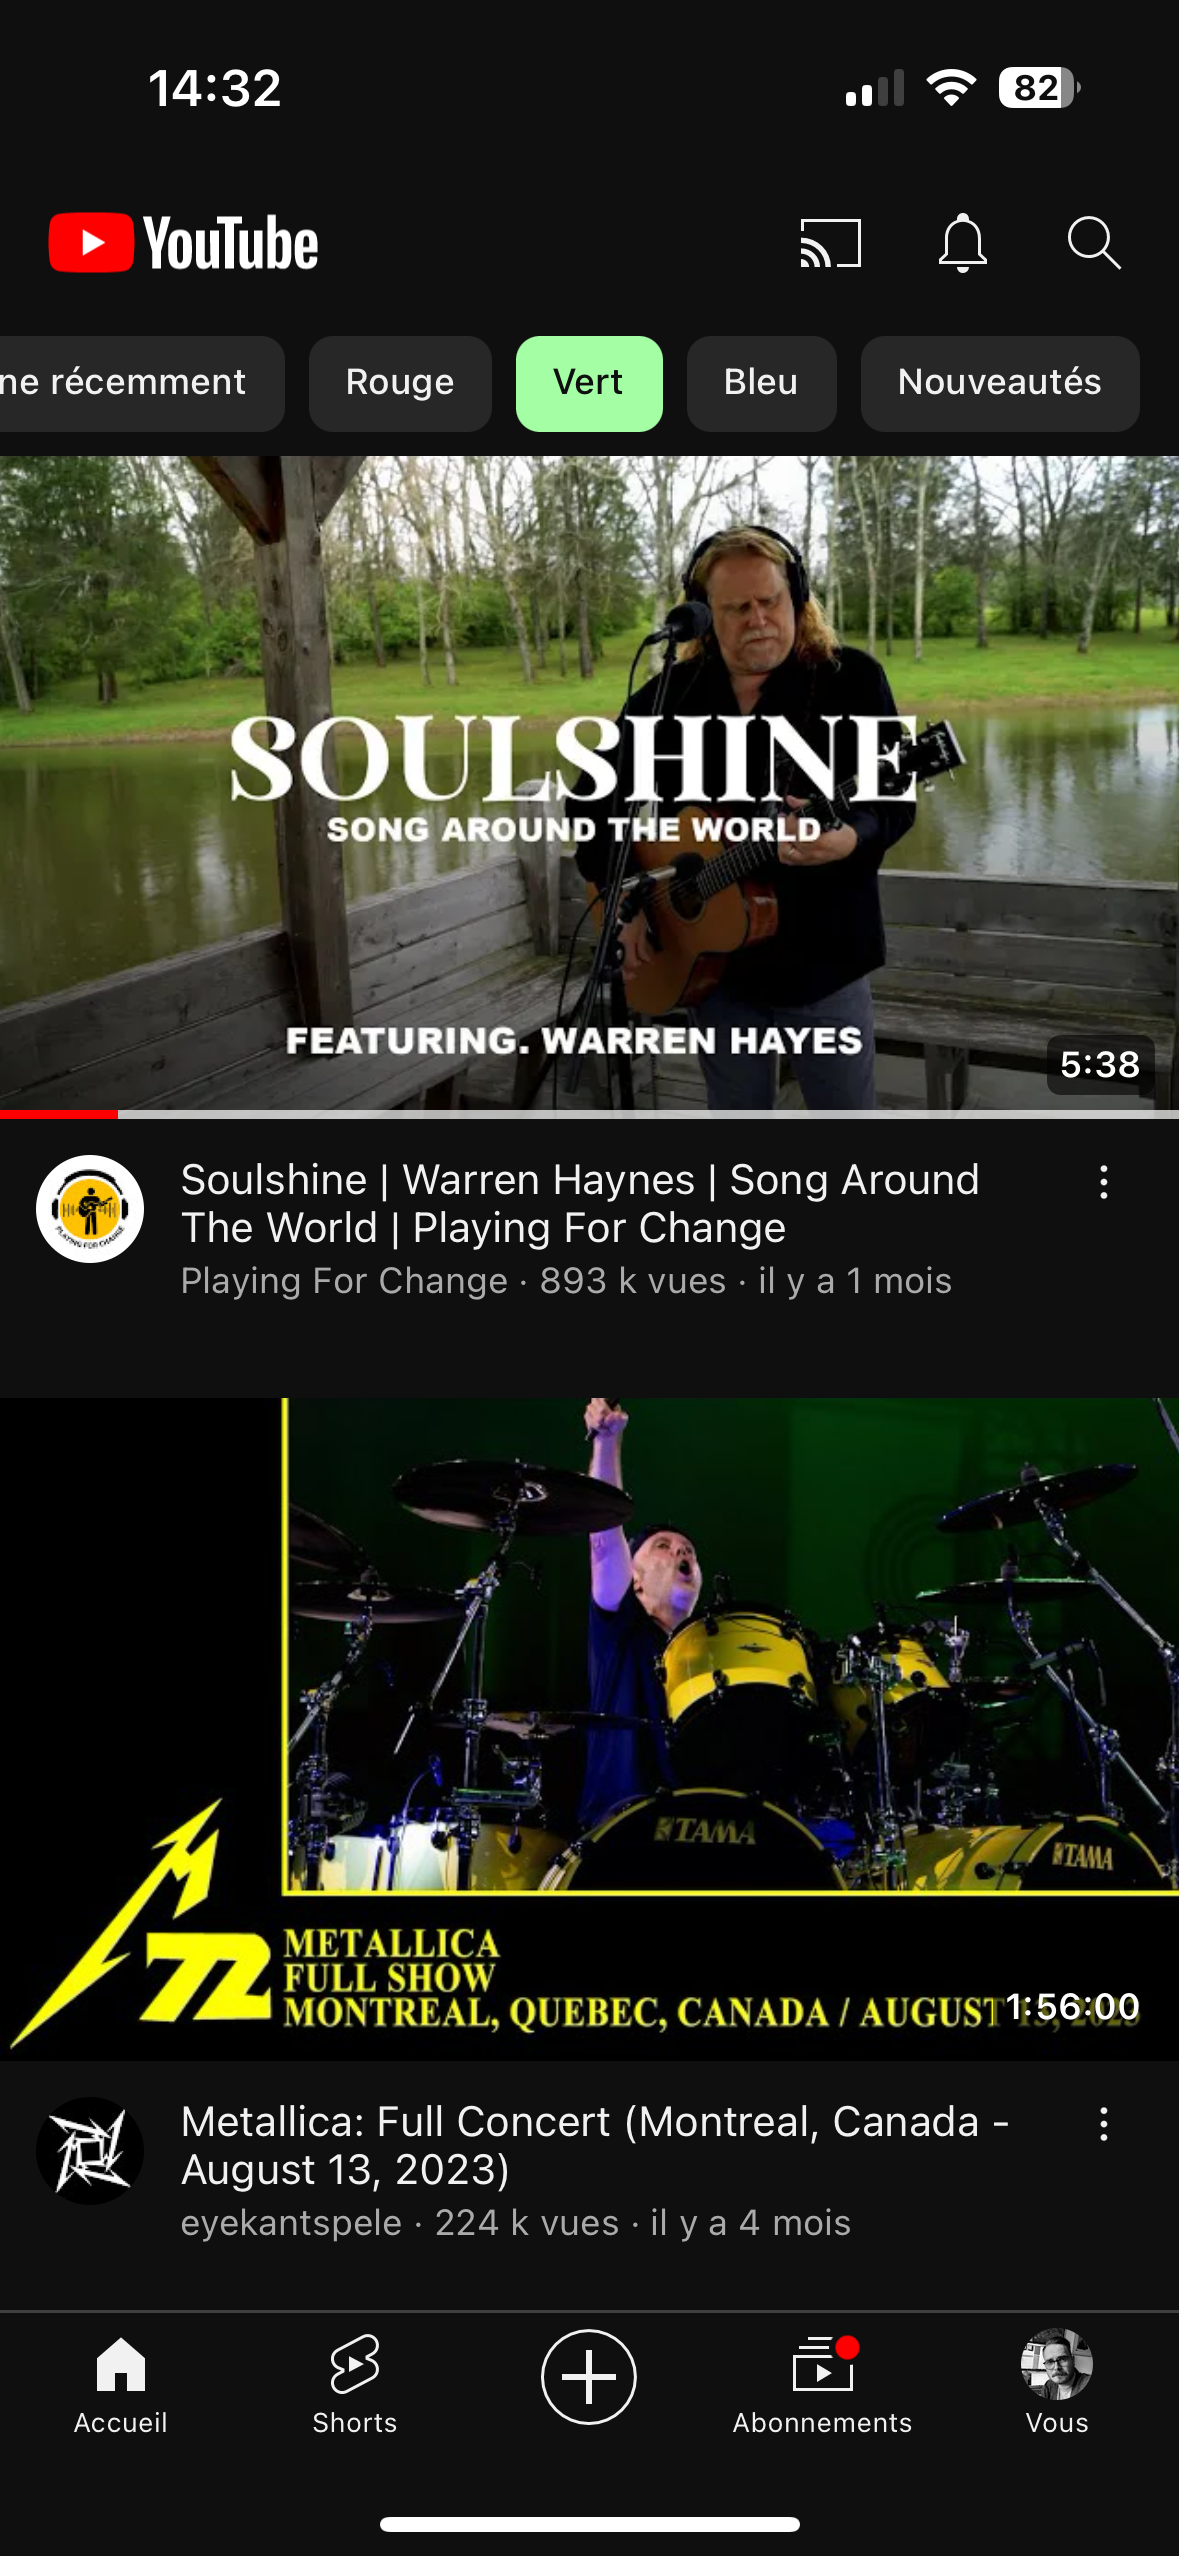 YouTube colors